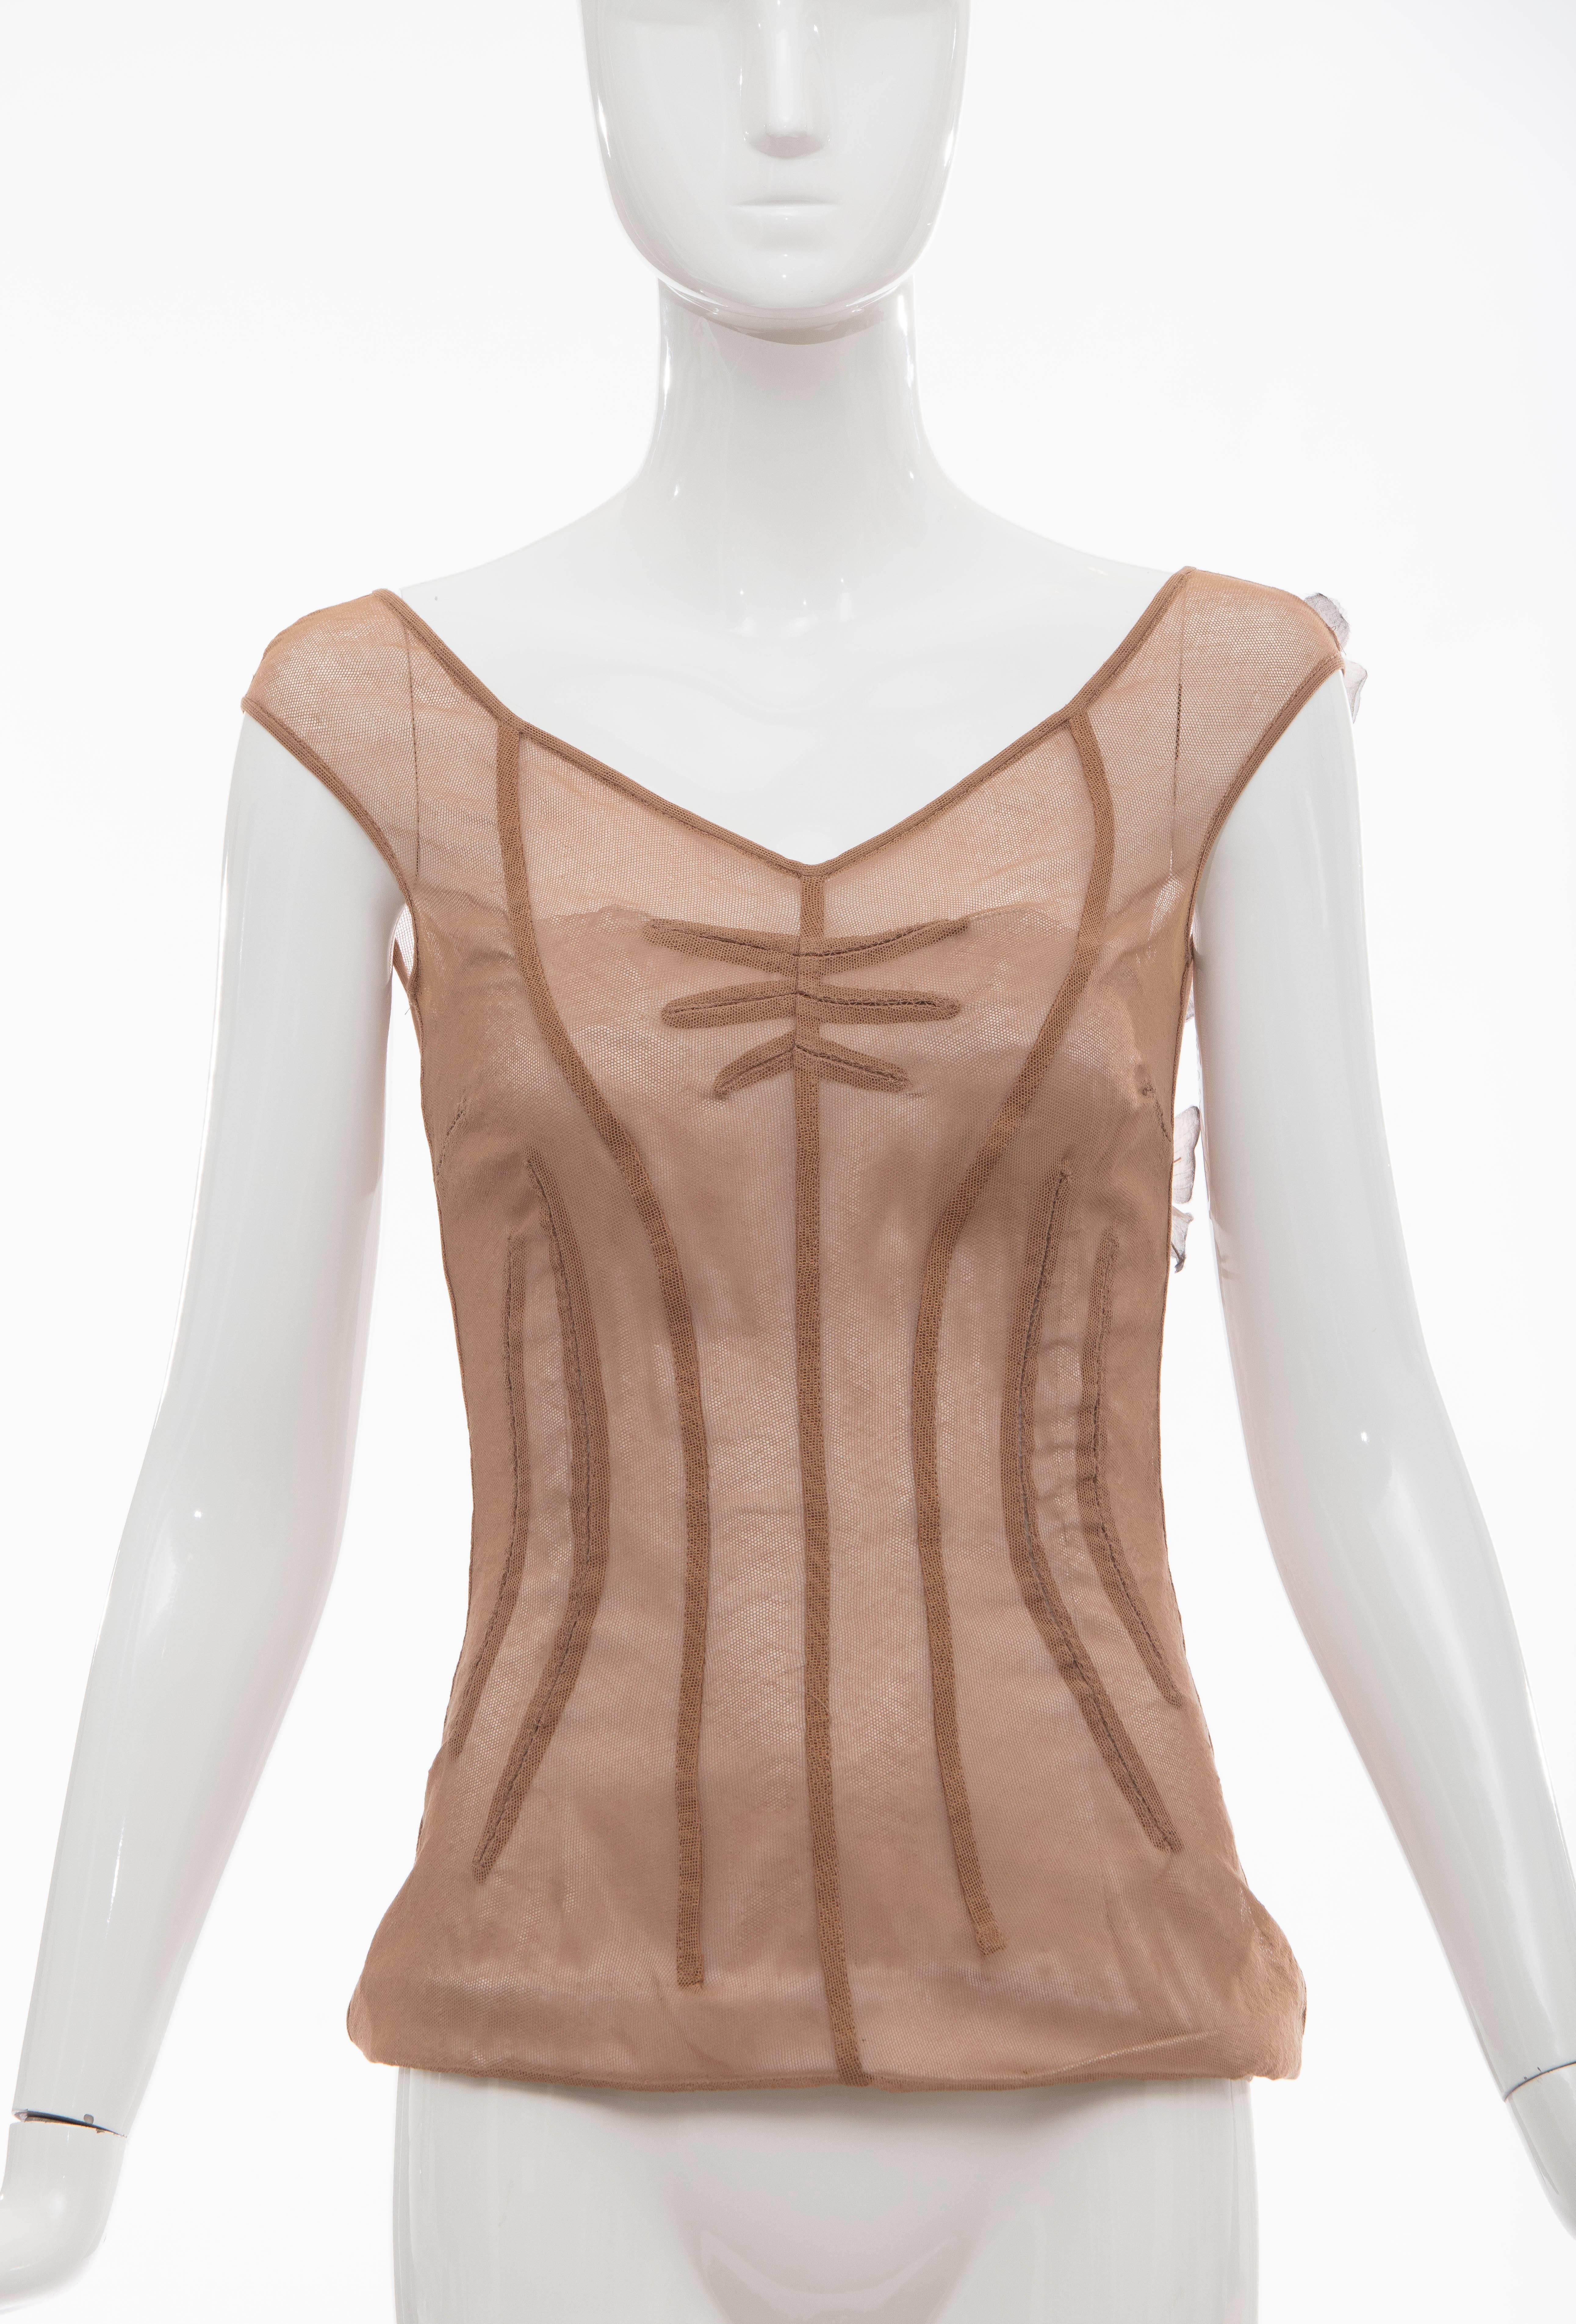 Dolce & Gabanna Spring-Summer 1998, Stromboli Collection cotton lycra mesh top with V-neck and appliqué butterfly embellishments featuring concealed zip closure at back.

IT. 42
US. 6

Bust: 34, Waist 32, Length 23
